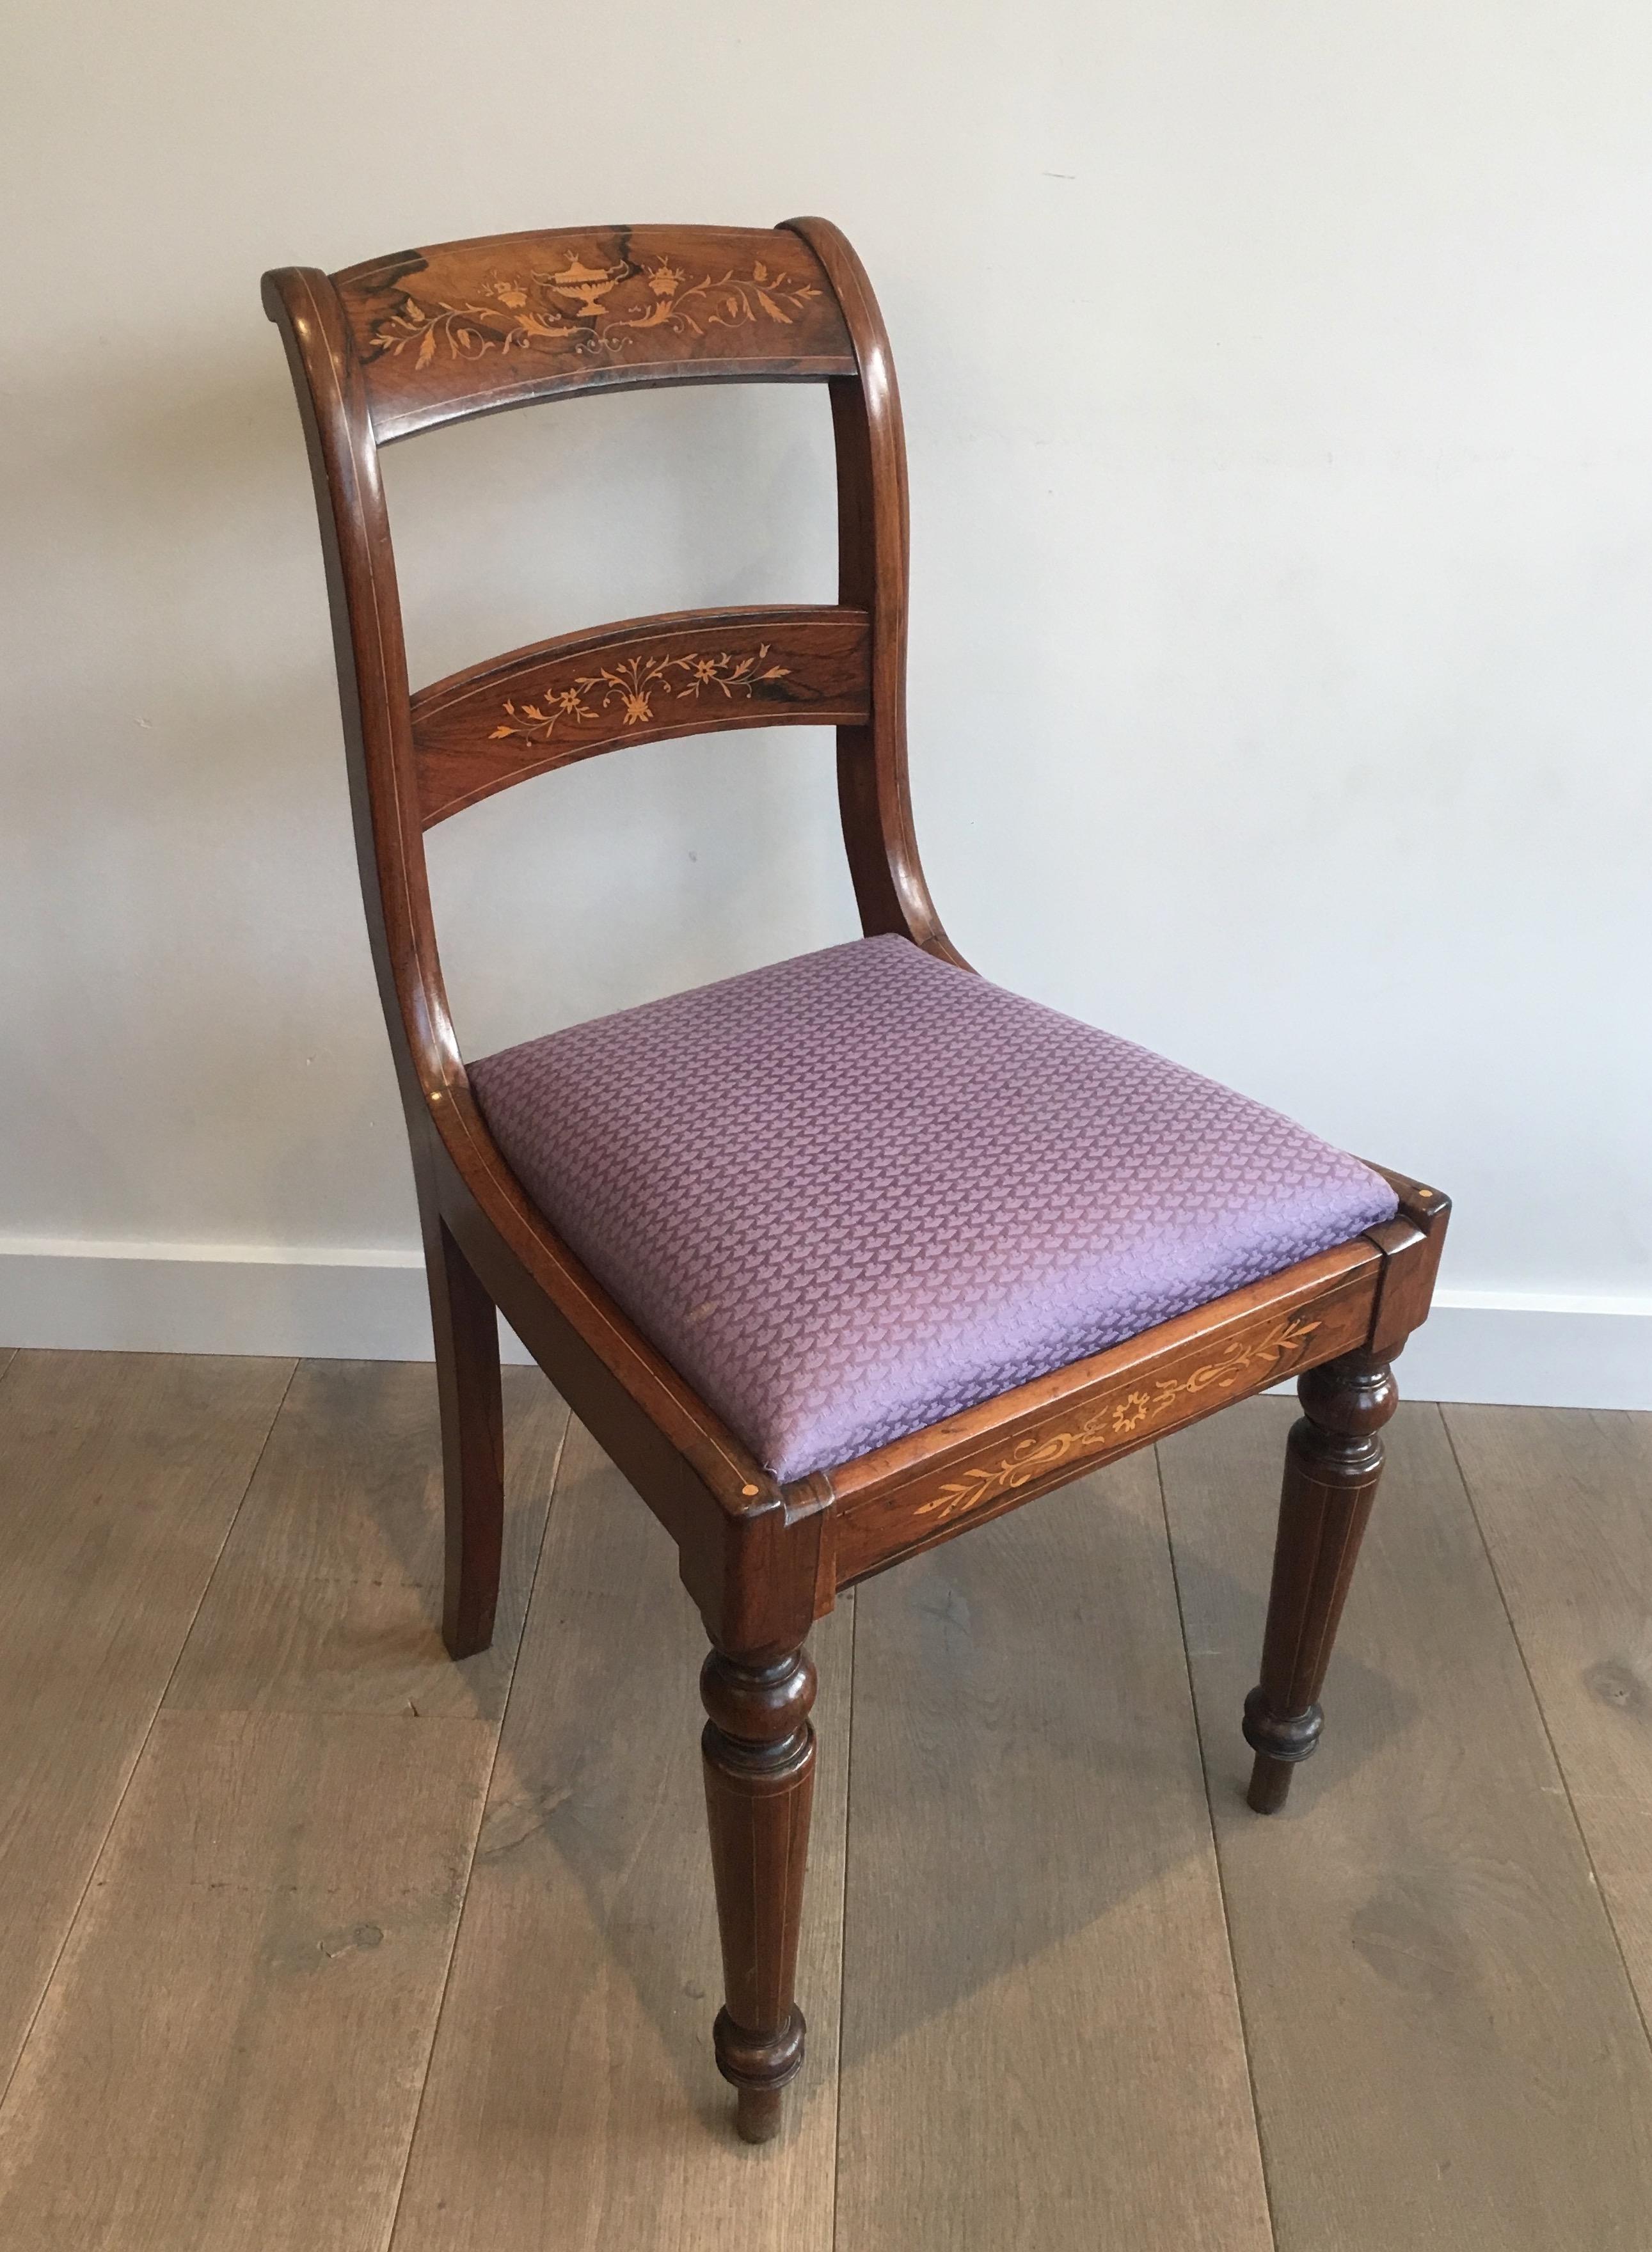 Charles X Attributed to Jeanselme, Pair of Charles the Xth Rosewood and Lemon Tree Chairs